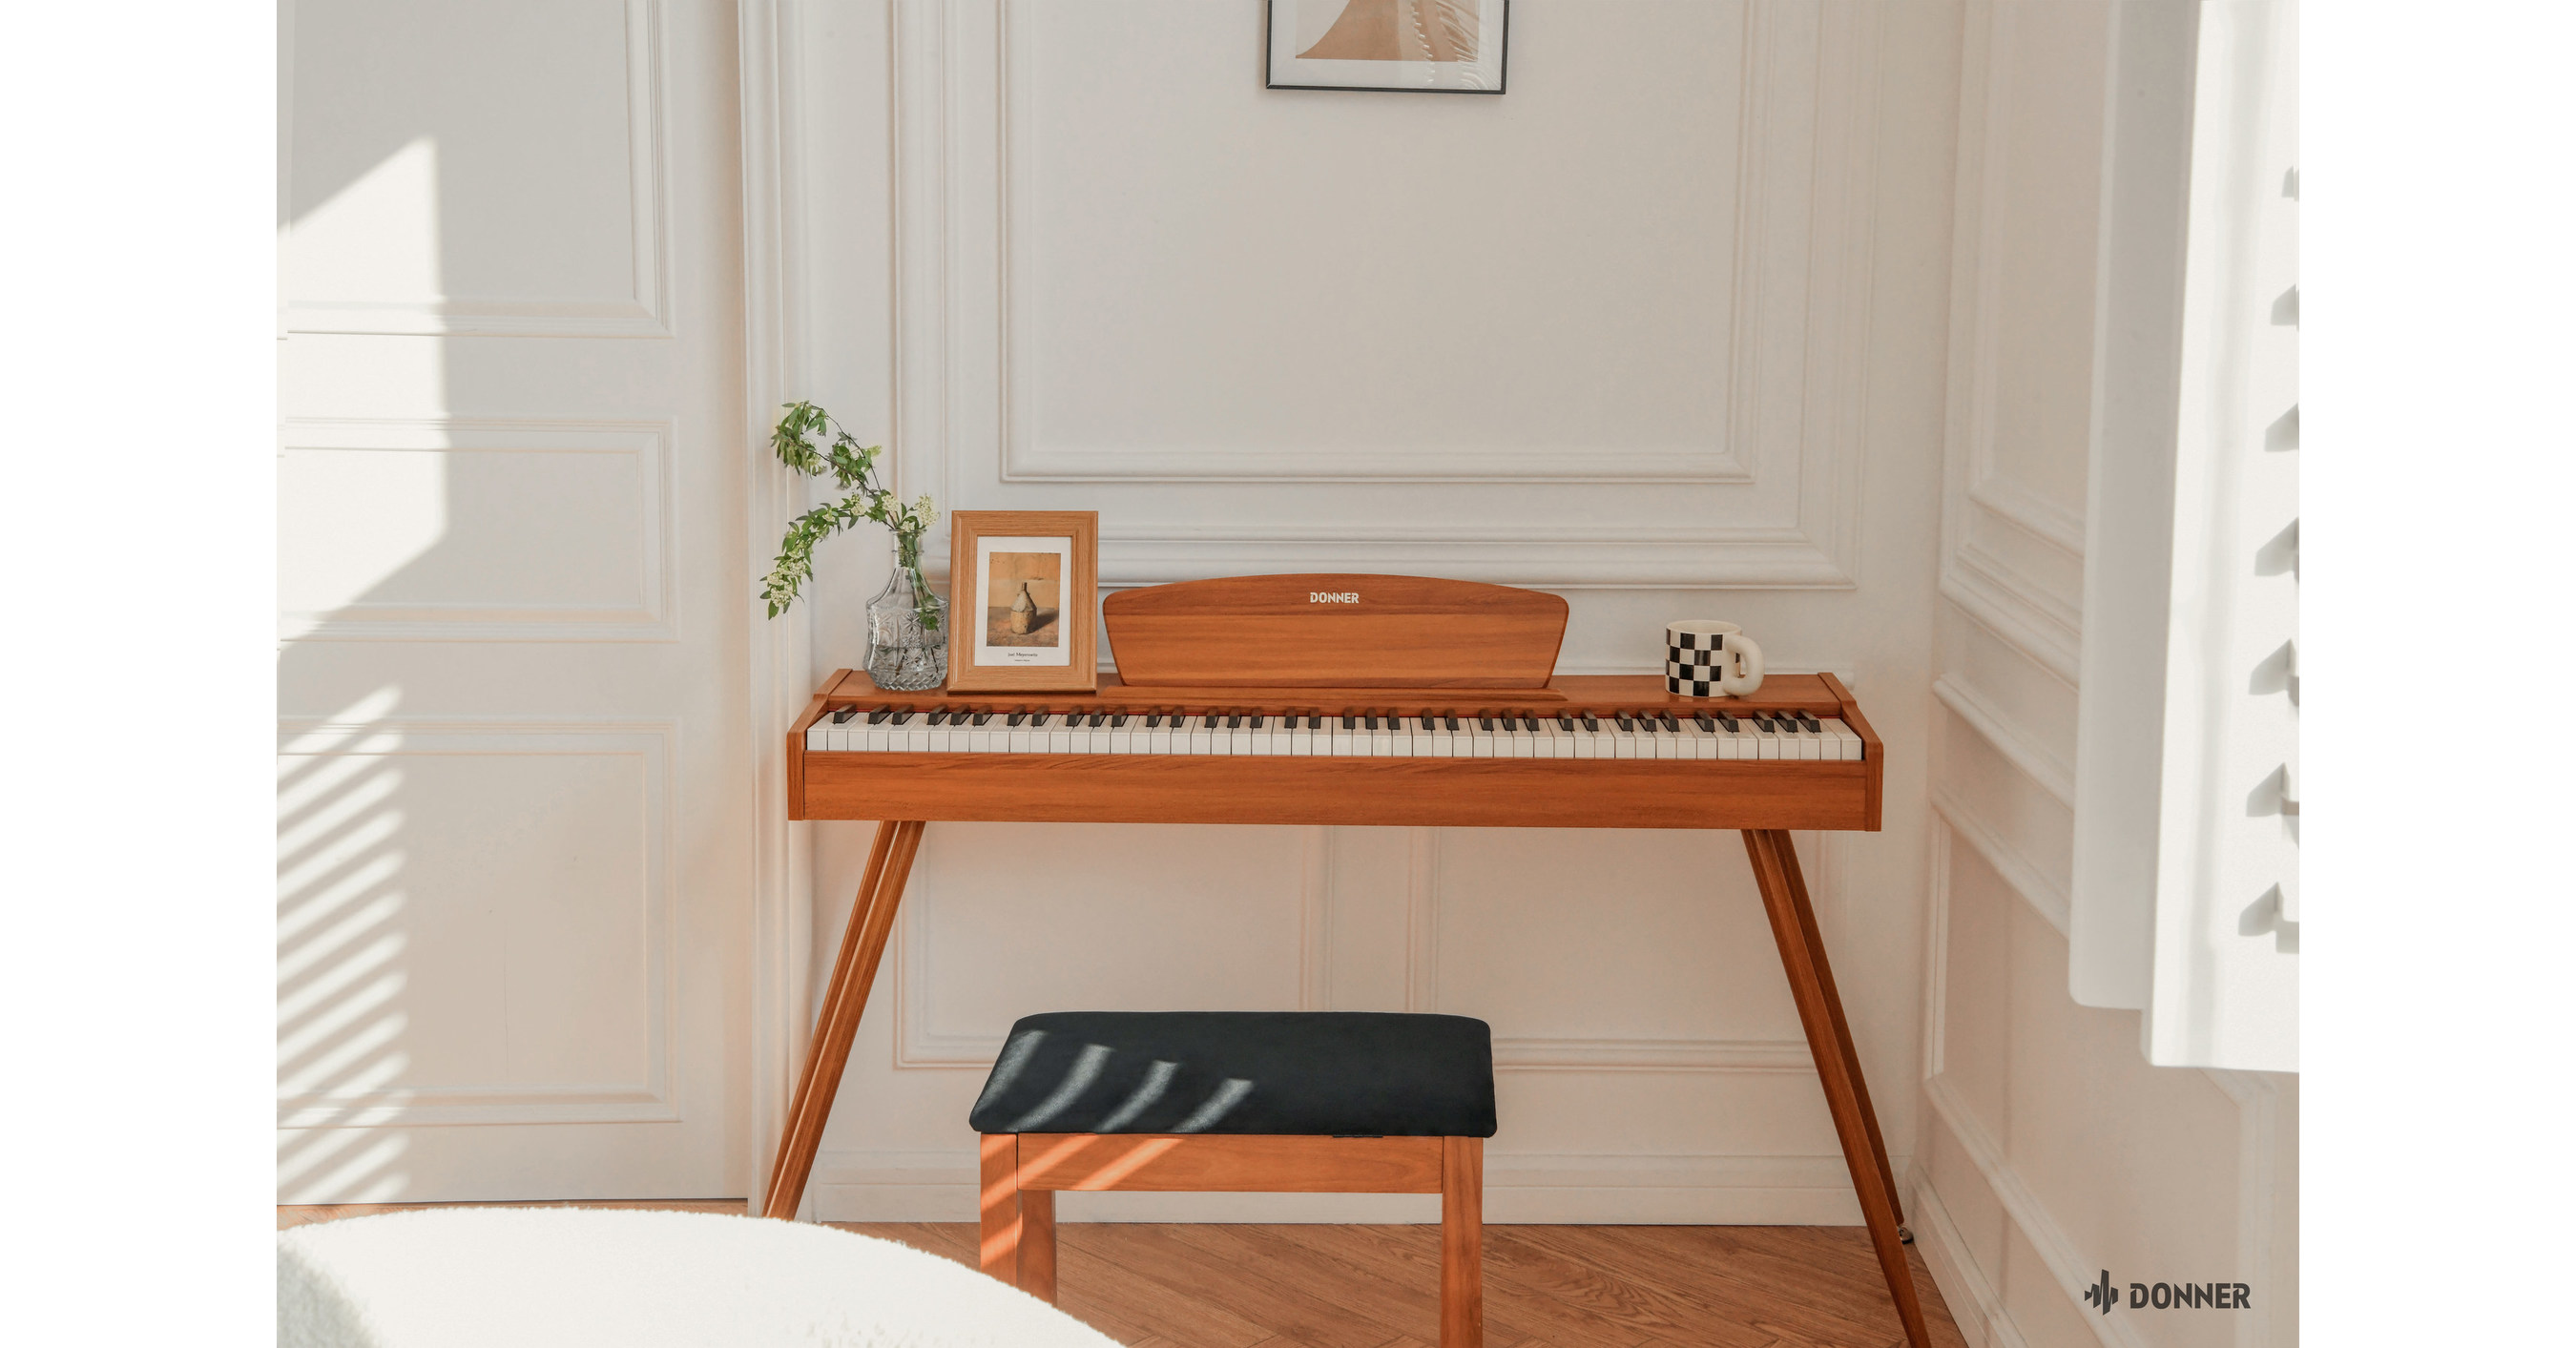 DONNER REIMAGINES DIGITAL PIANOS WITH THE VINTAGE, POWERFUL, AND ELEGANT  DDP-80